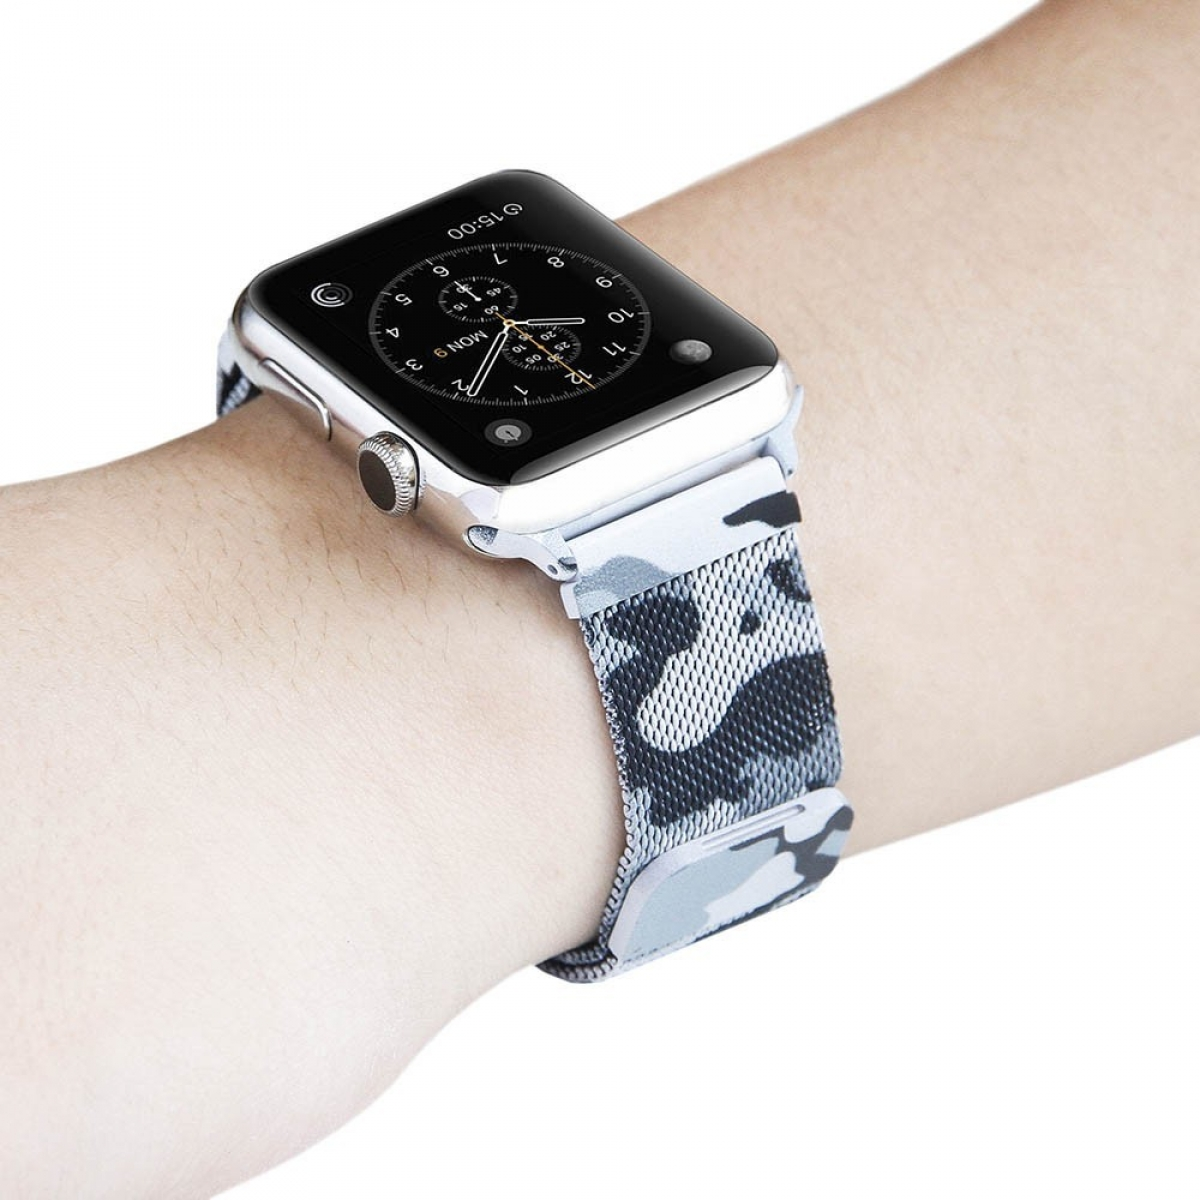 42mm, Smartband, Camouflage, CASEONLINE Watch Multicolor Milanaise Apple,